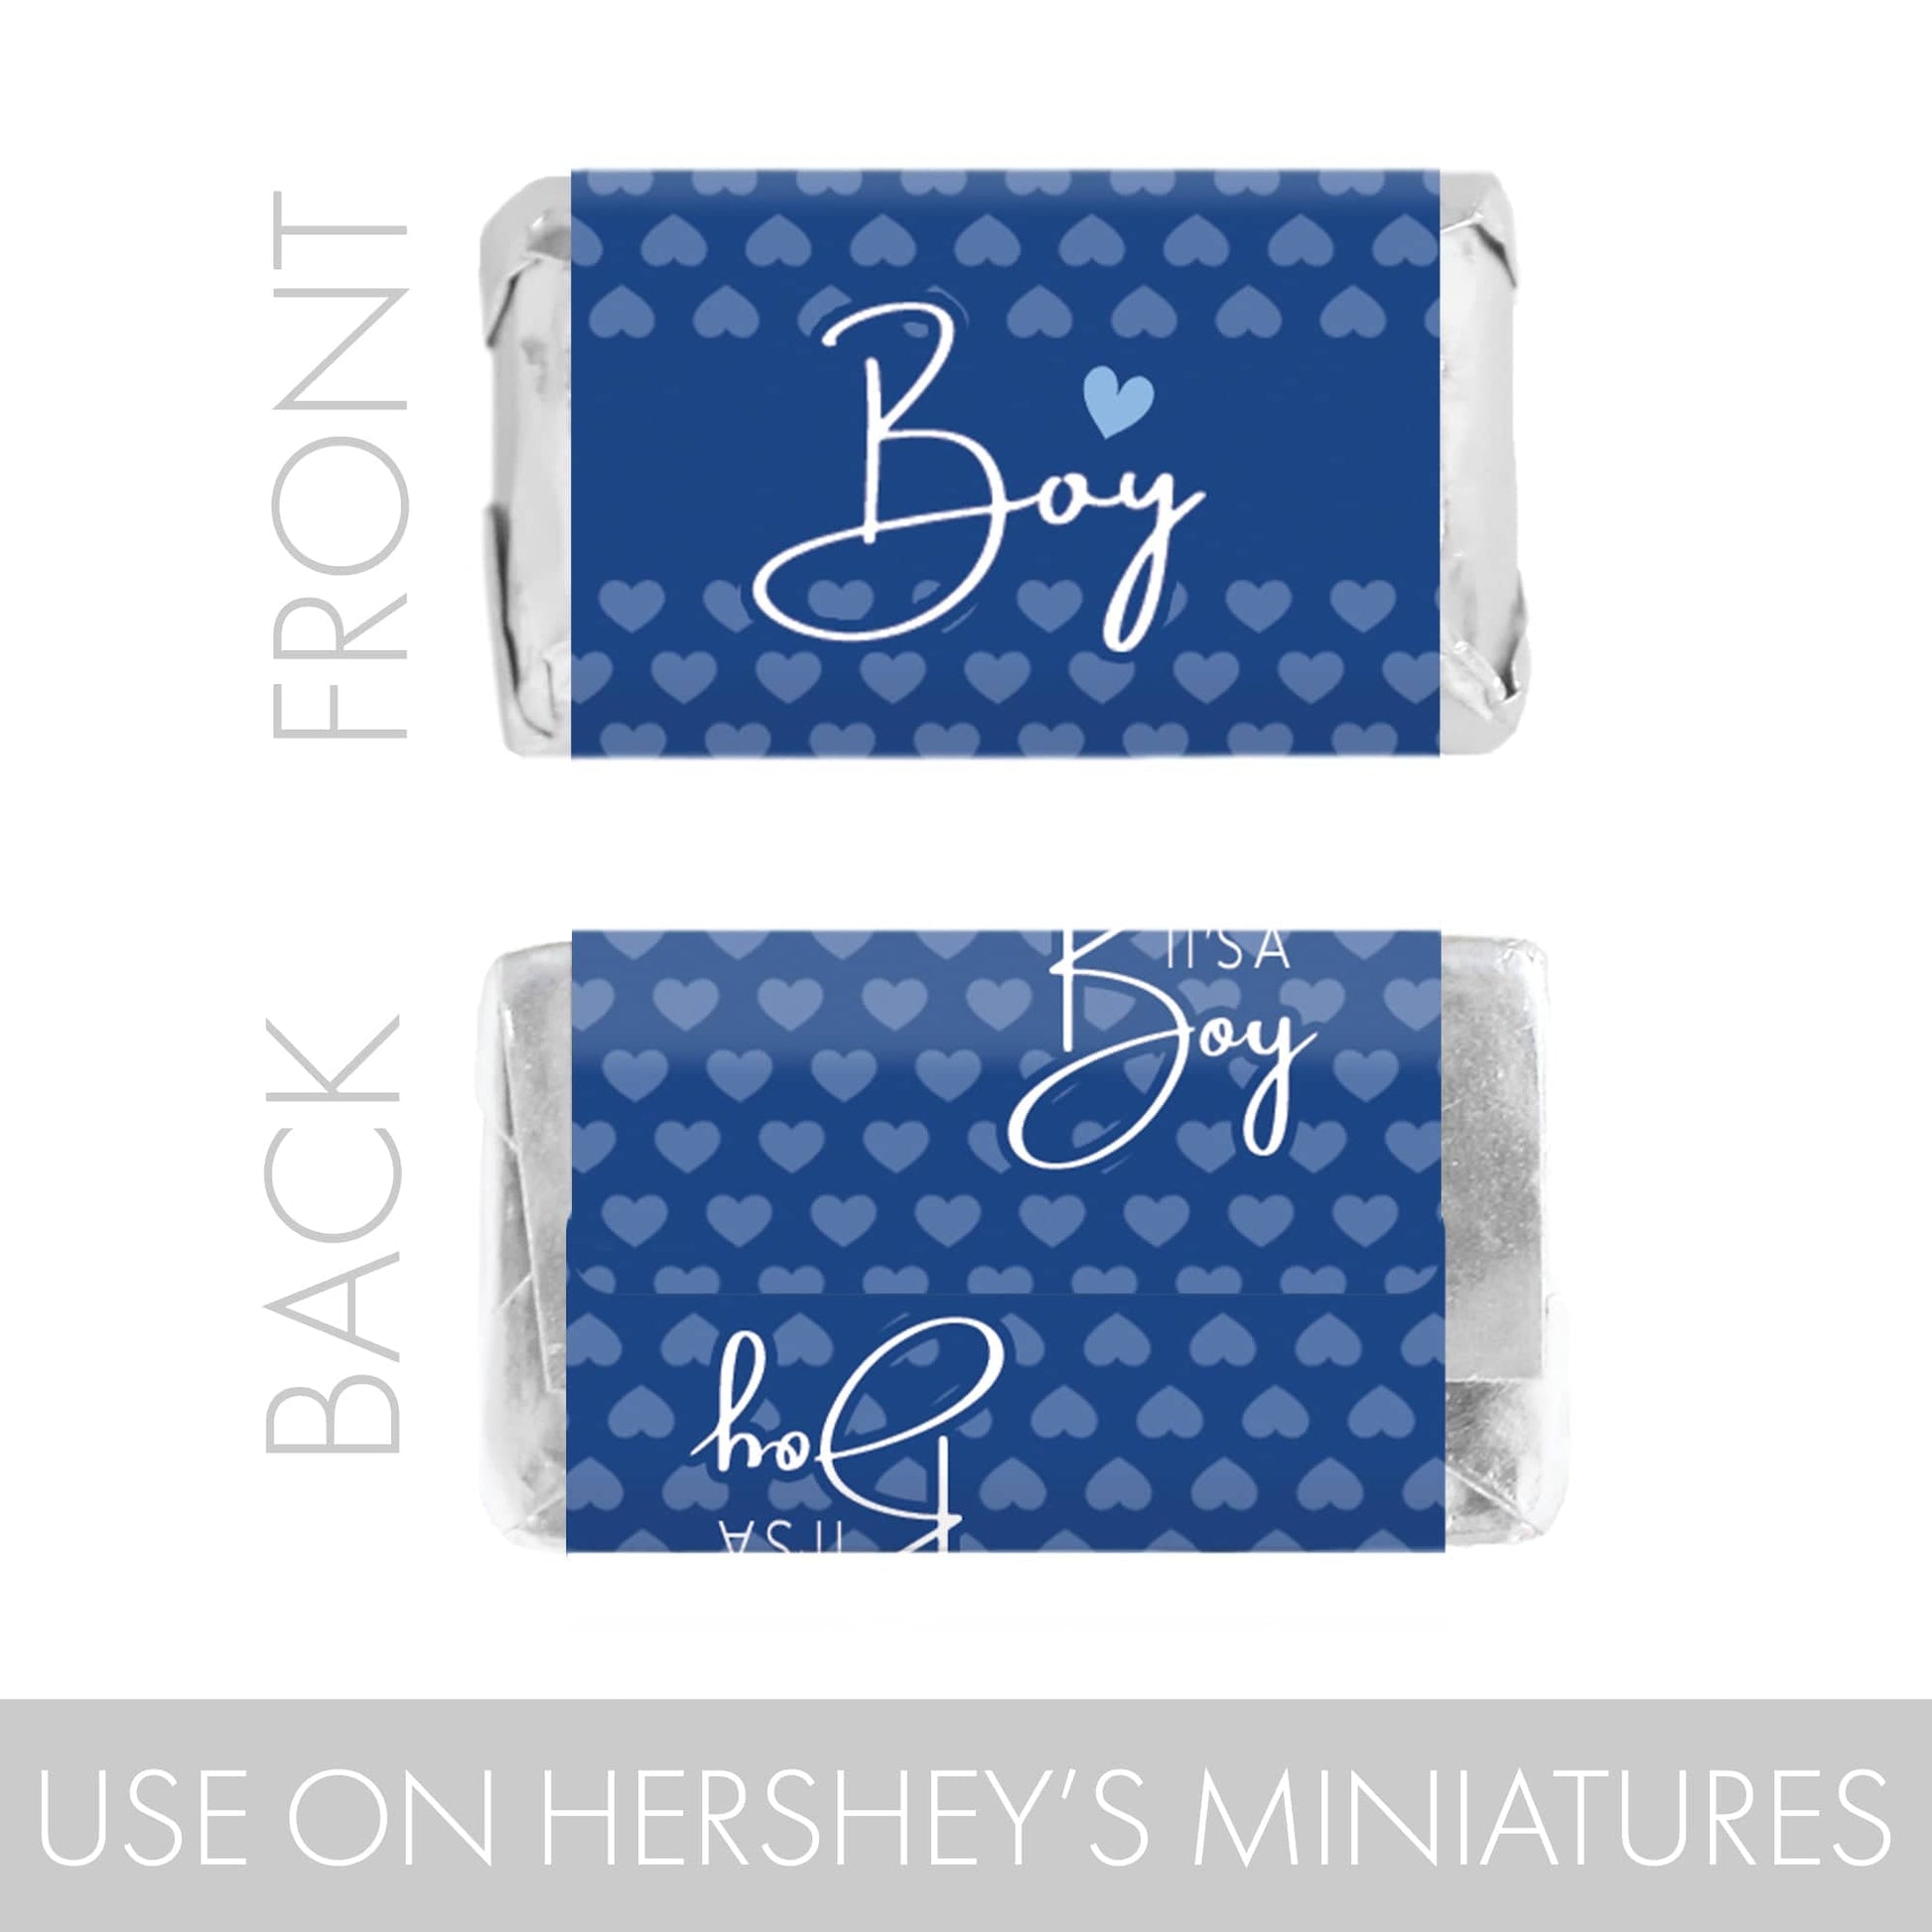 It’s a Boy Baby Shower Mini Candy Bar Labels - Sweet Baby Boy - 45 Stickers